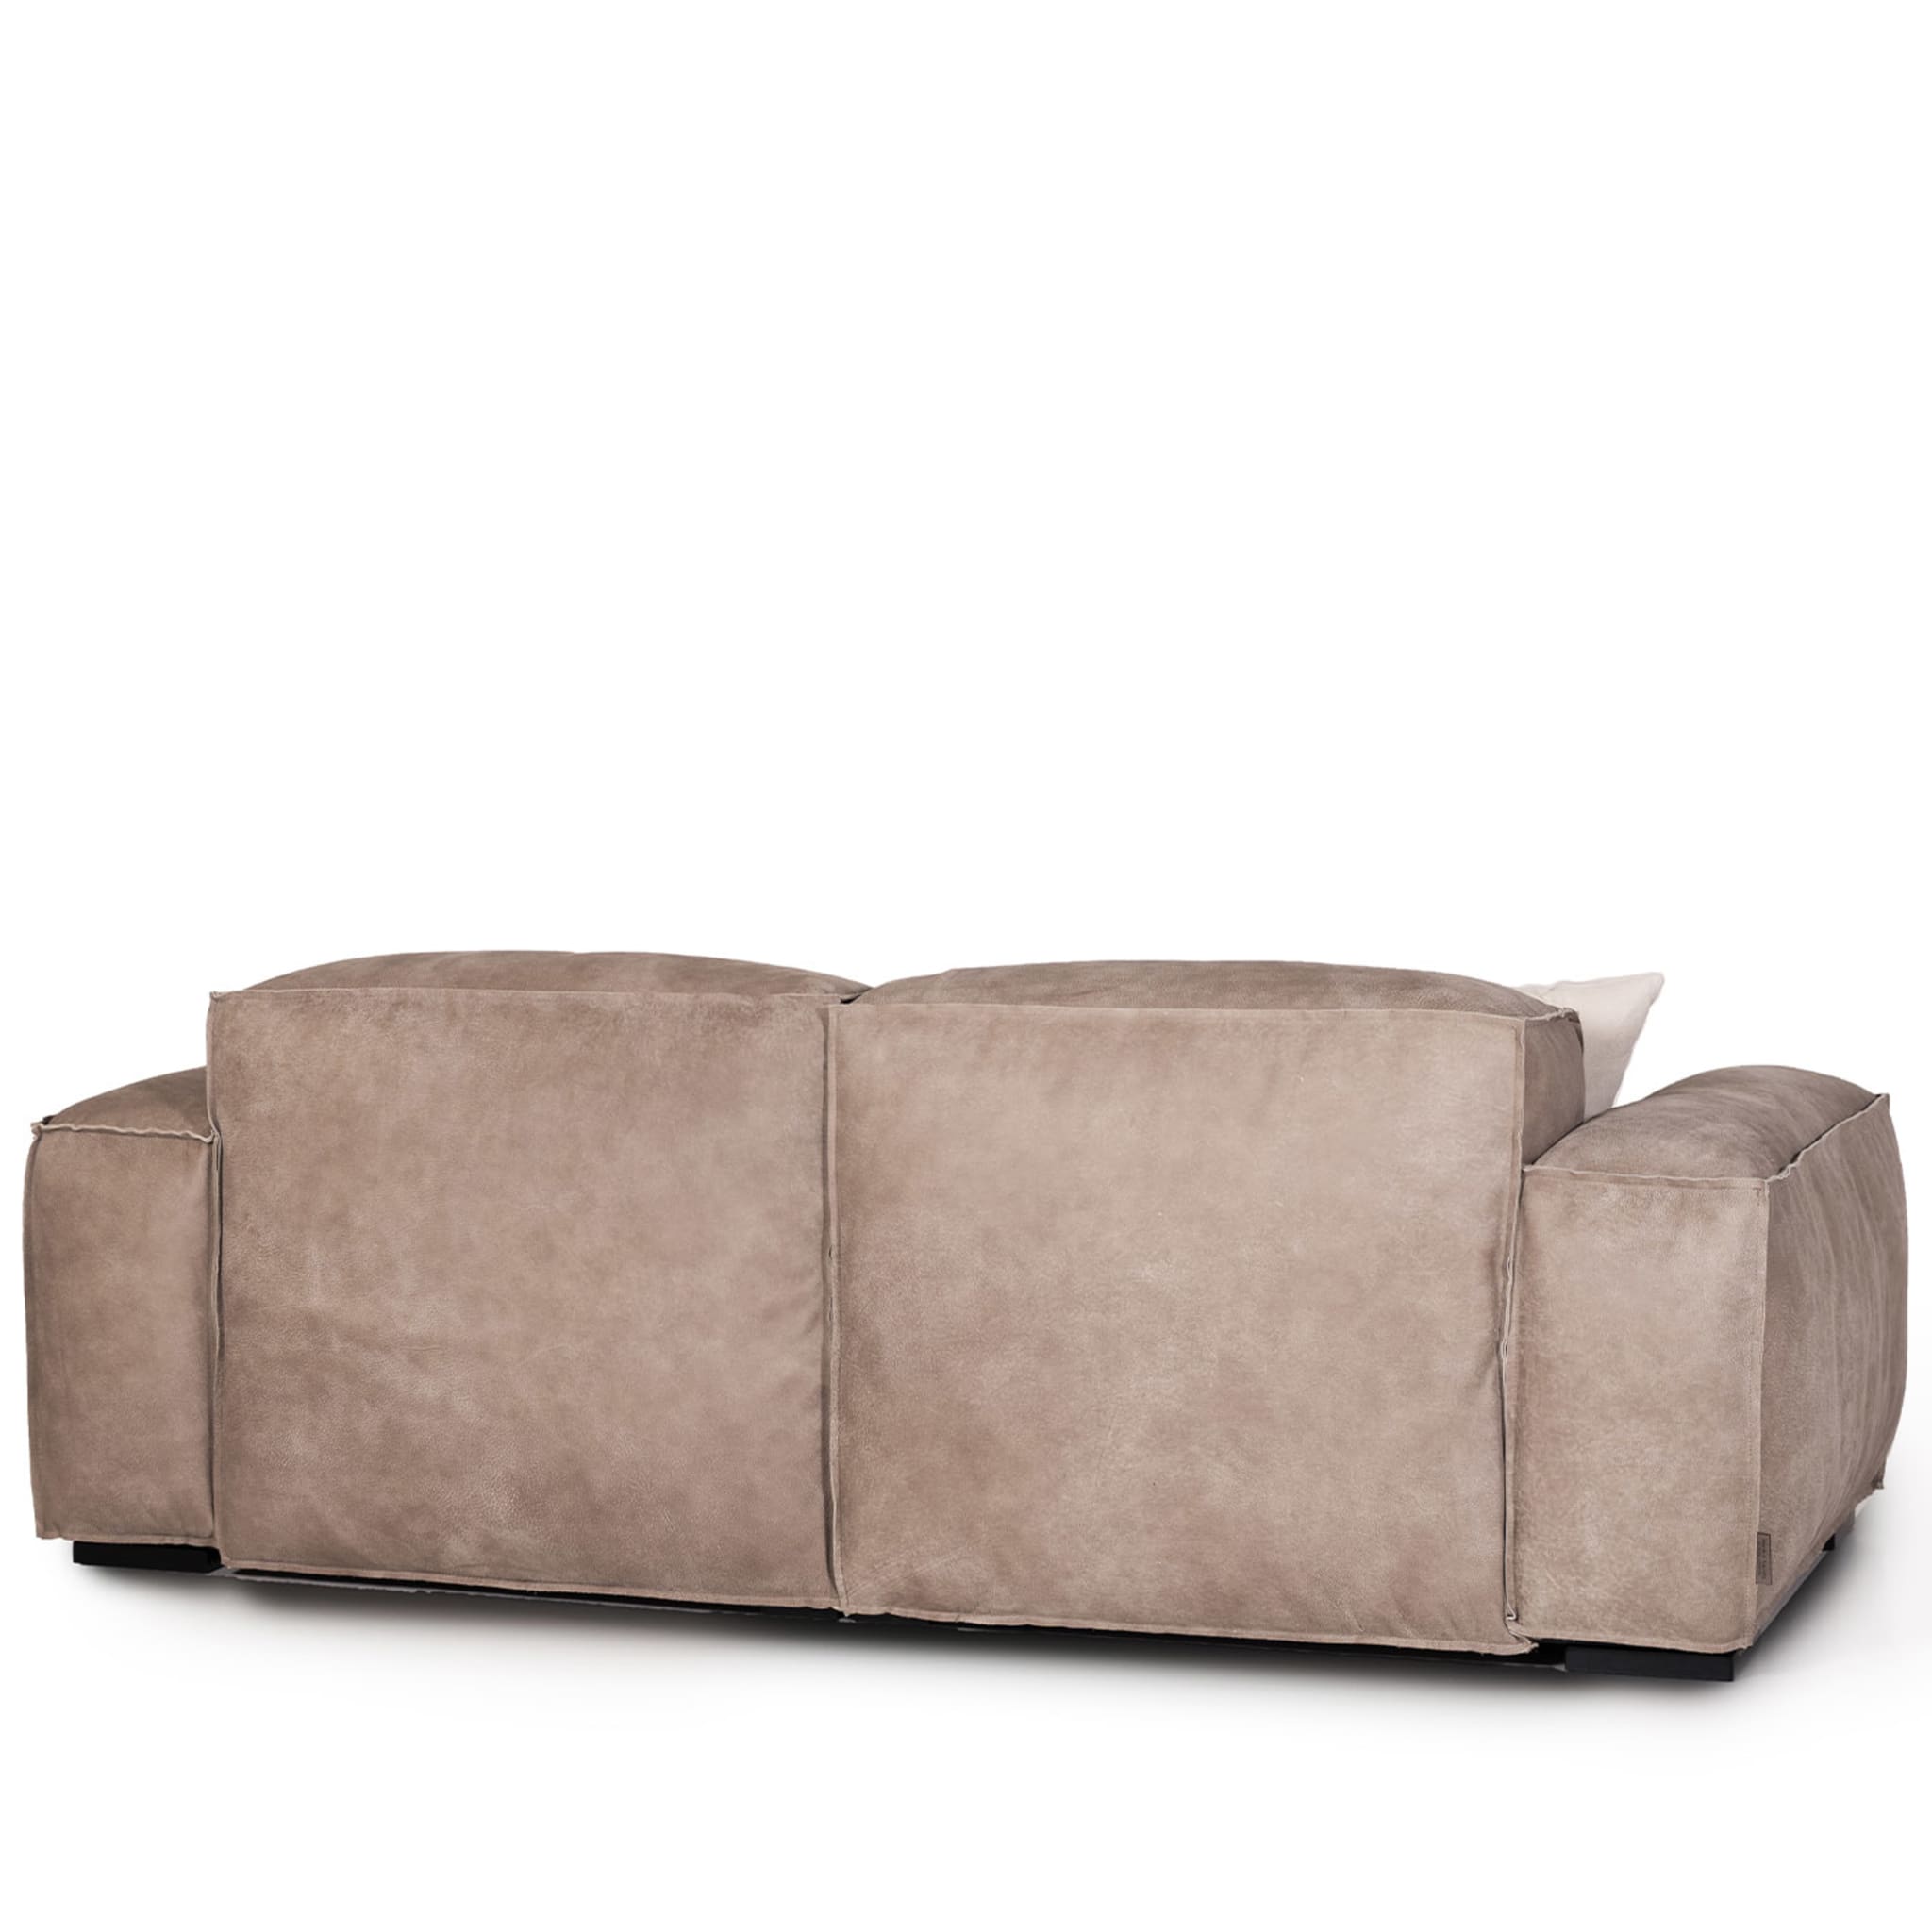 Placido 2 Seater Sofa in Gray Leather  - Alternative view 4